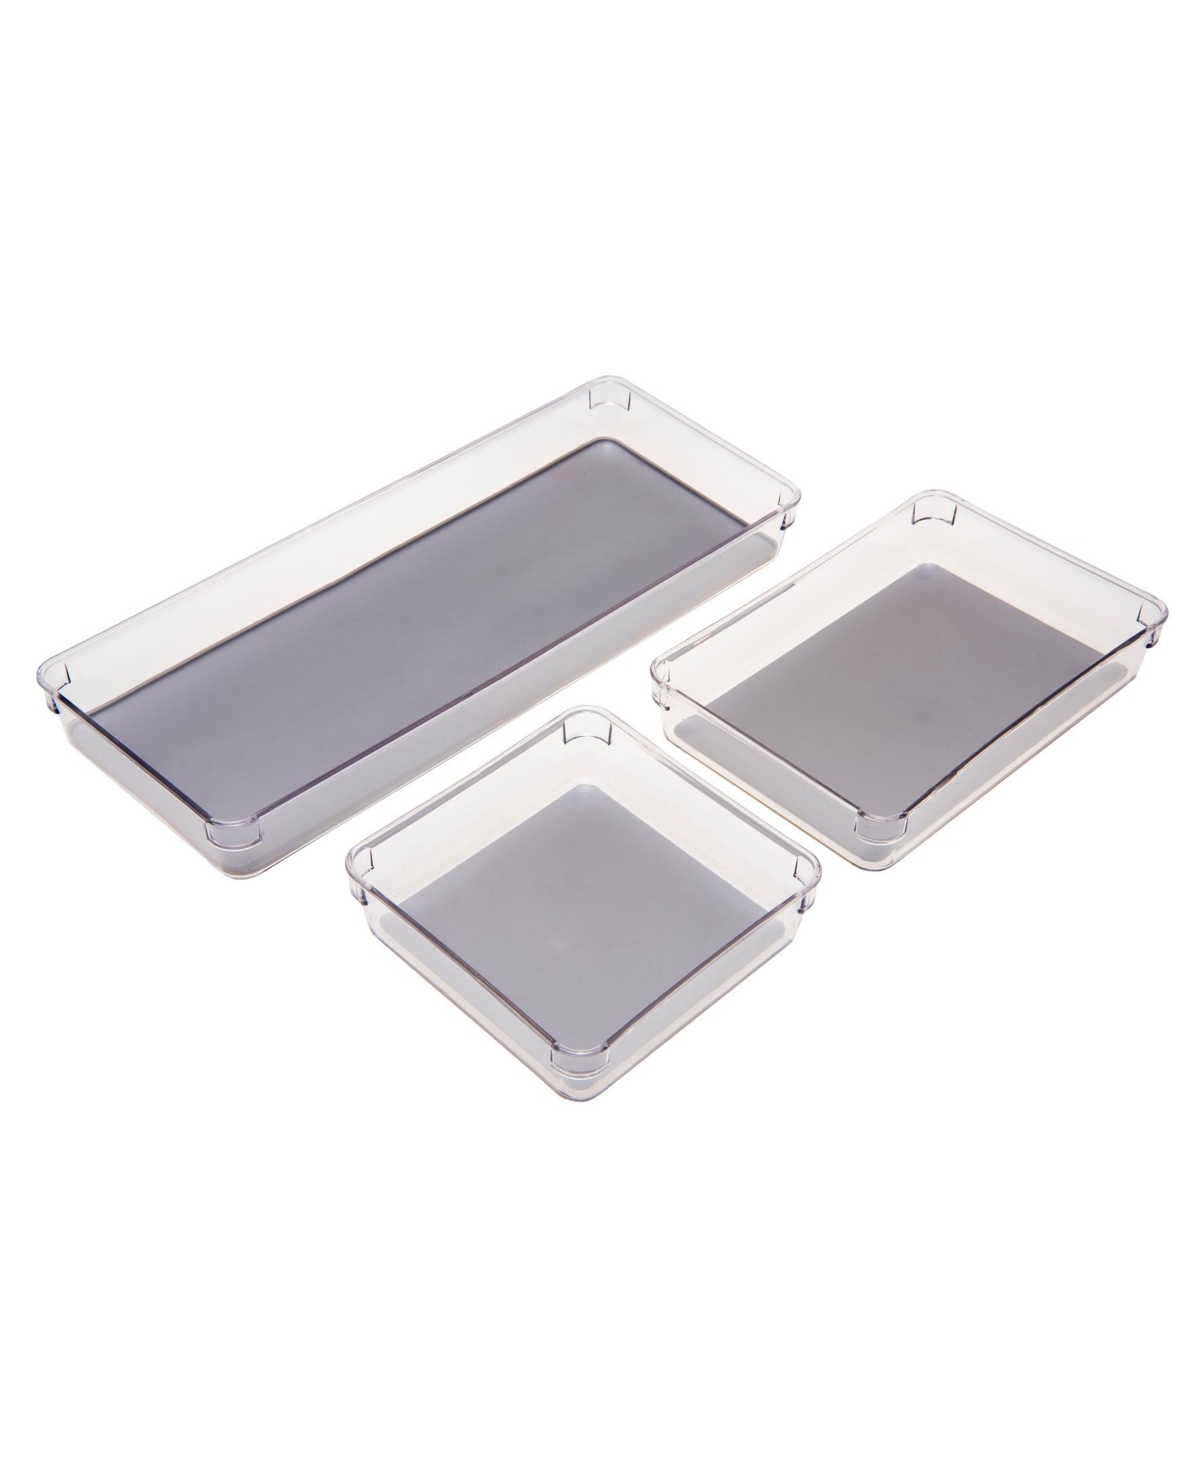 Multipurpose Drawer Organizers, 3 Pack - Open Miscellaneous